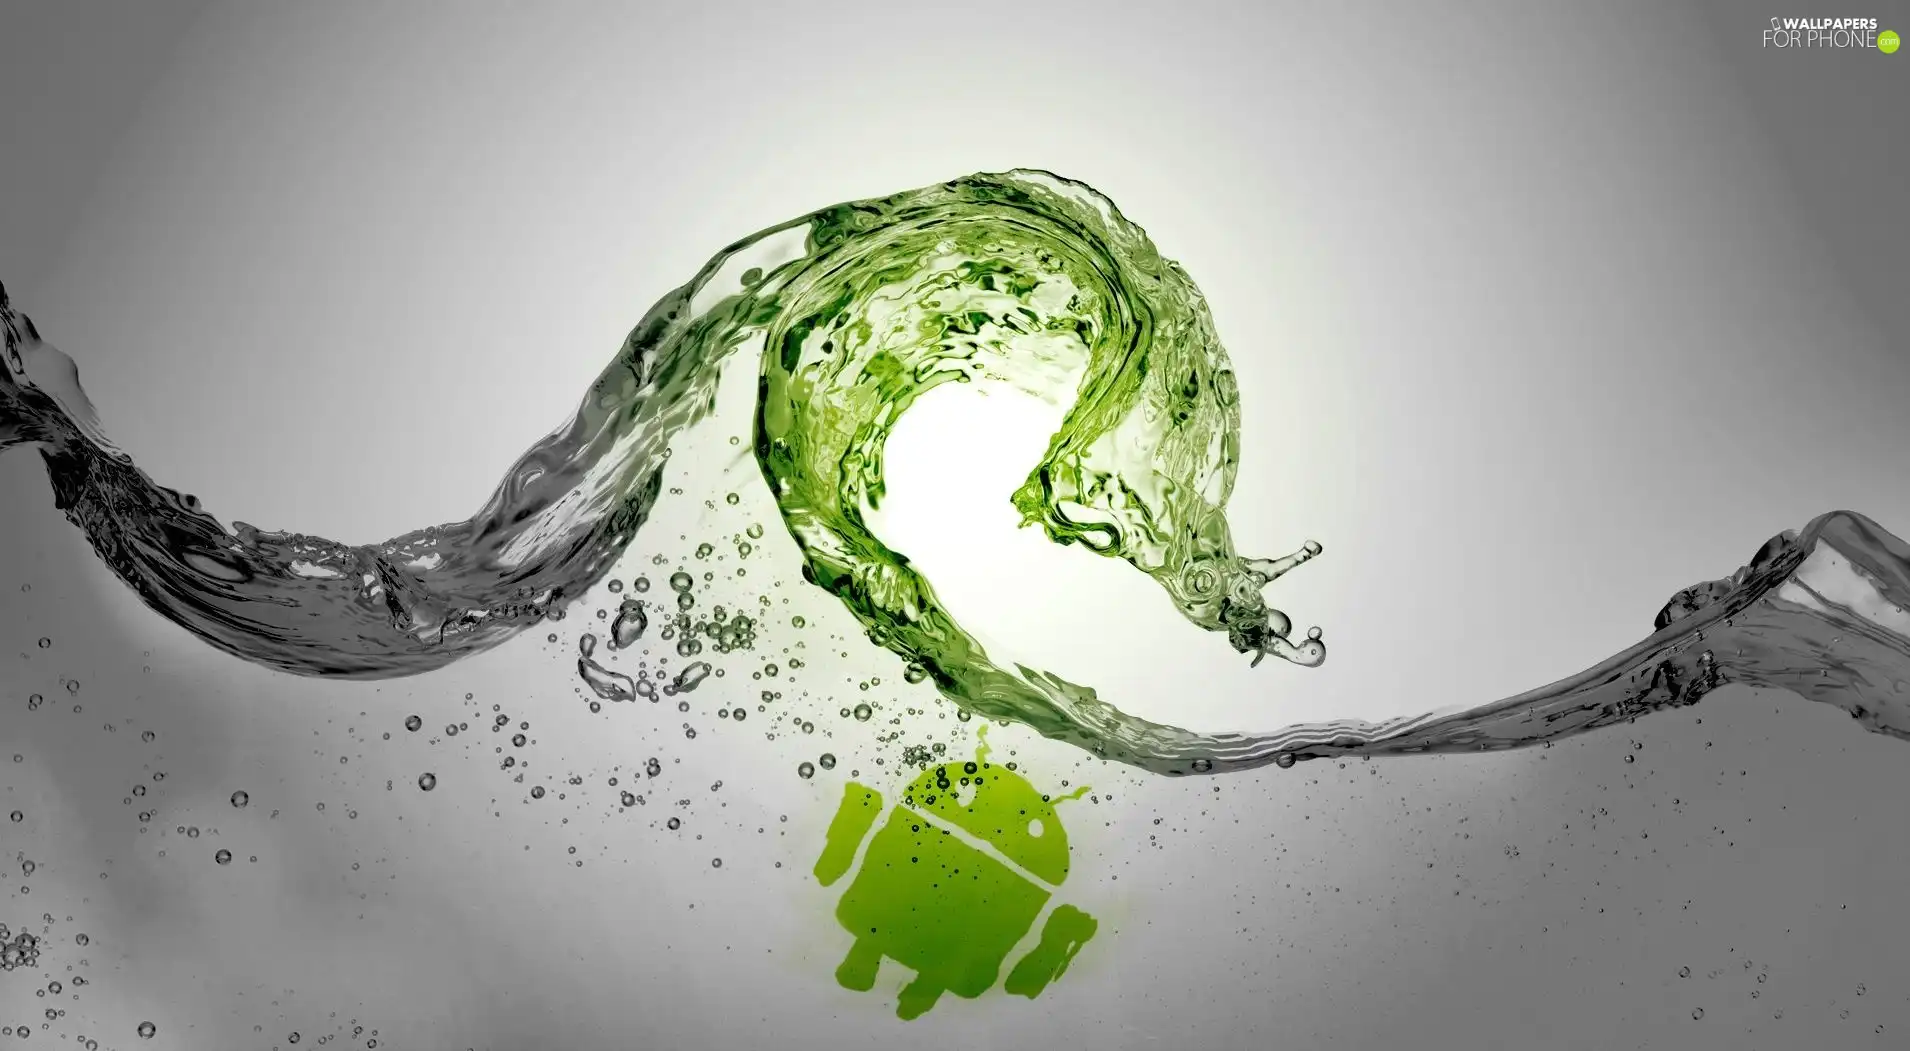 Android, water, Tides